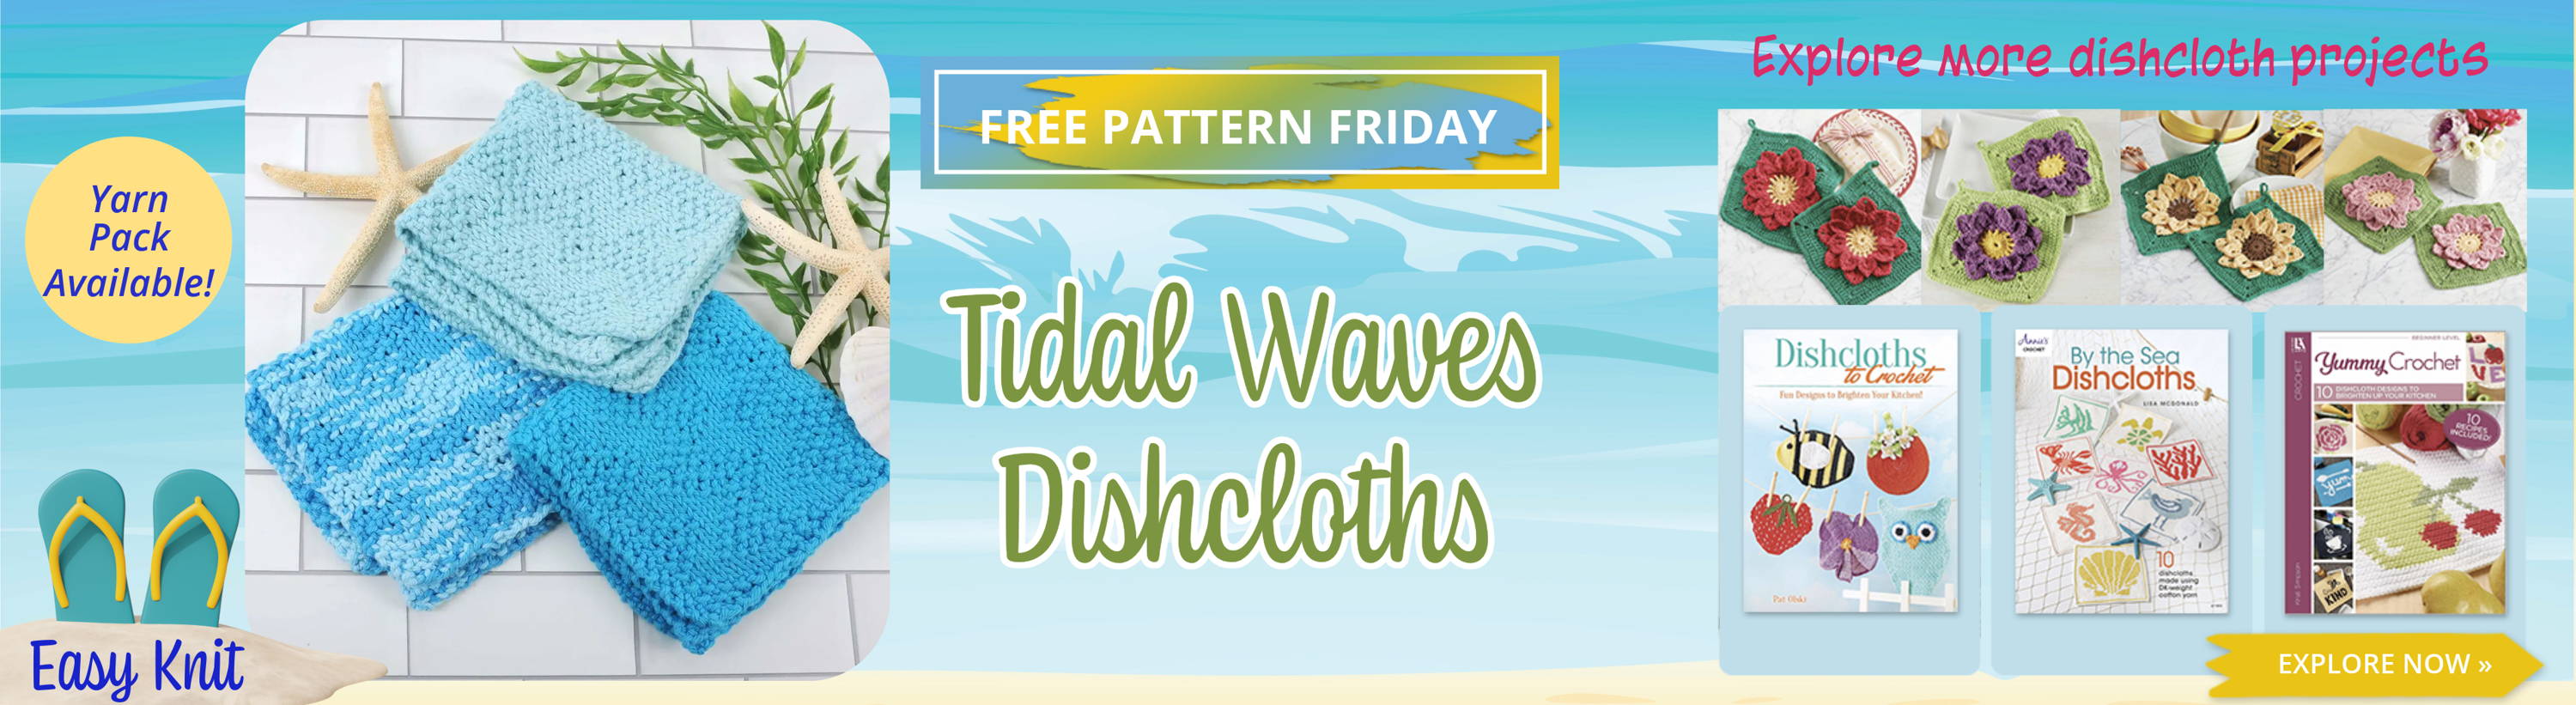 Free Pattern Friday! Tidal Wave Dishcloths (Easy Knit). Explore more dishcloth projects. Image: Tidal Waves Dishcloths, dishcloth books and patterns.